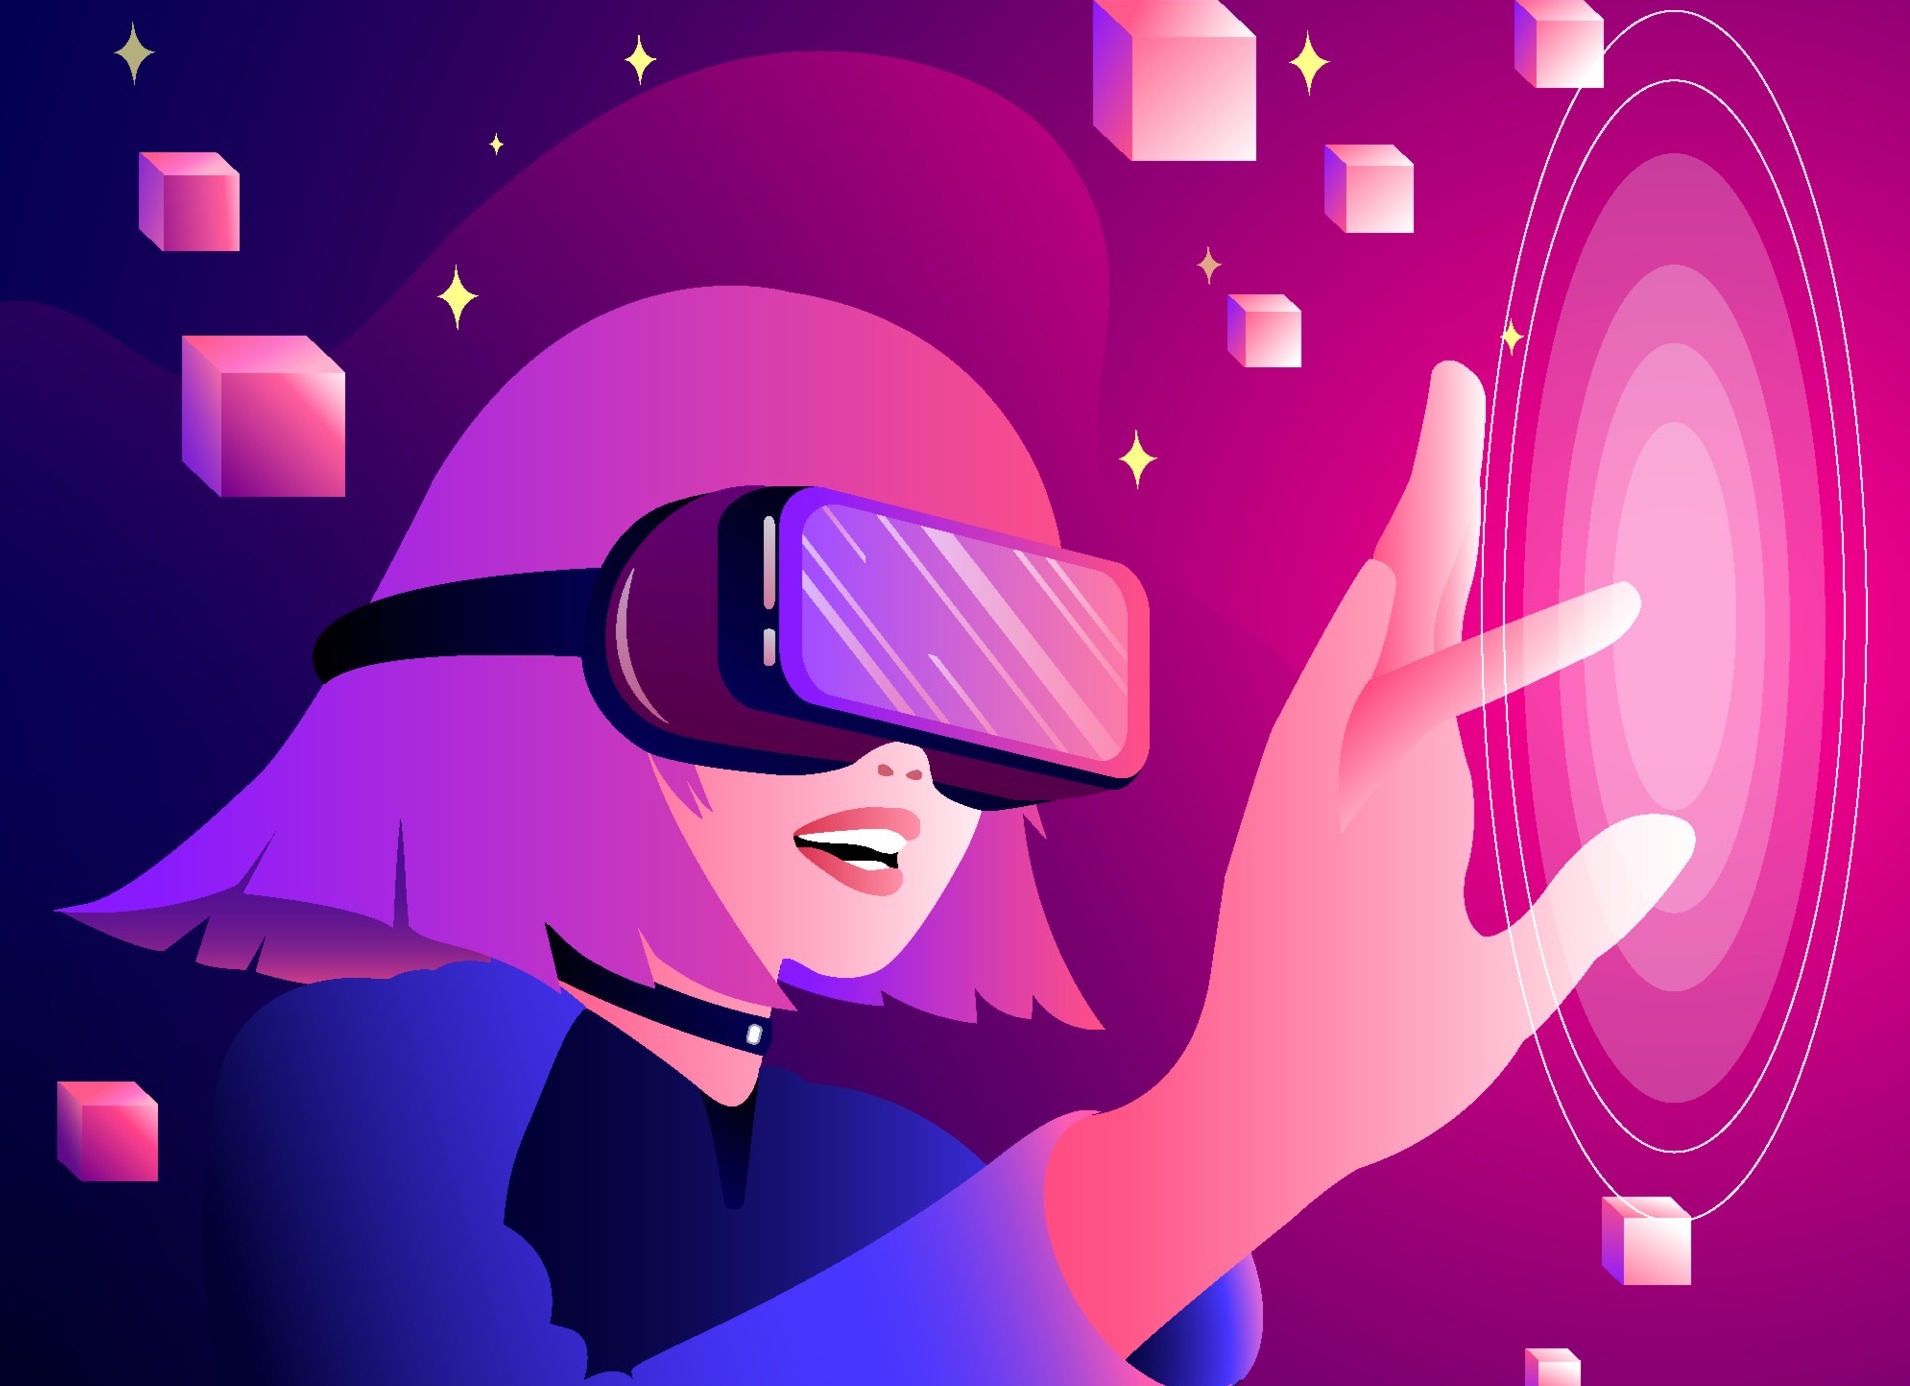 Digital illustration of a girl with VR goggles touching something in front of her